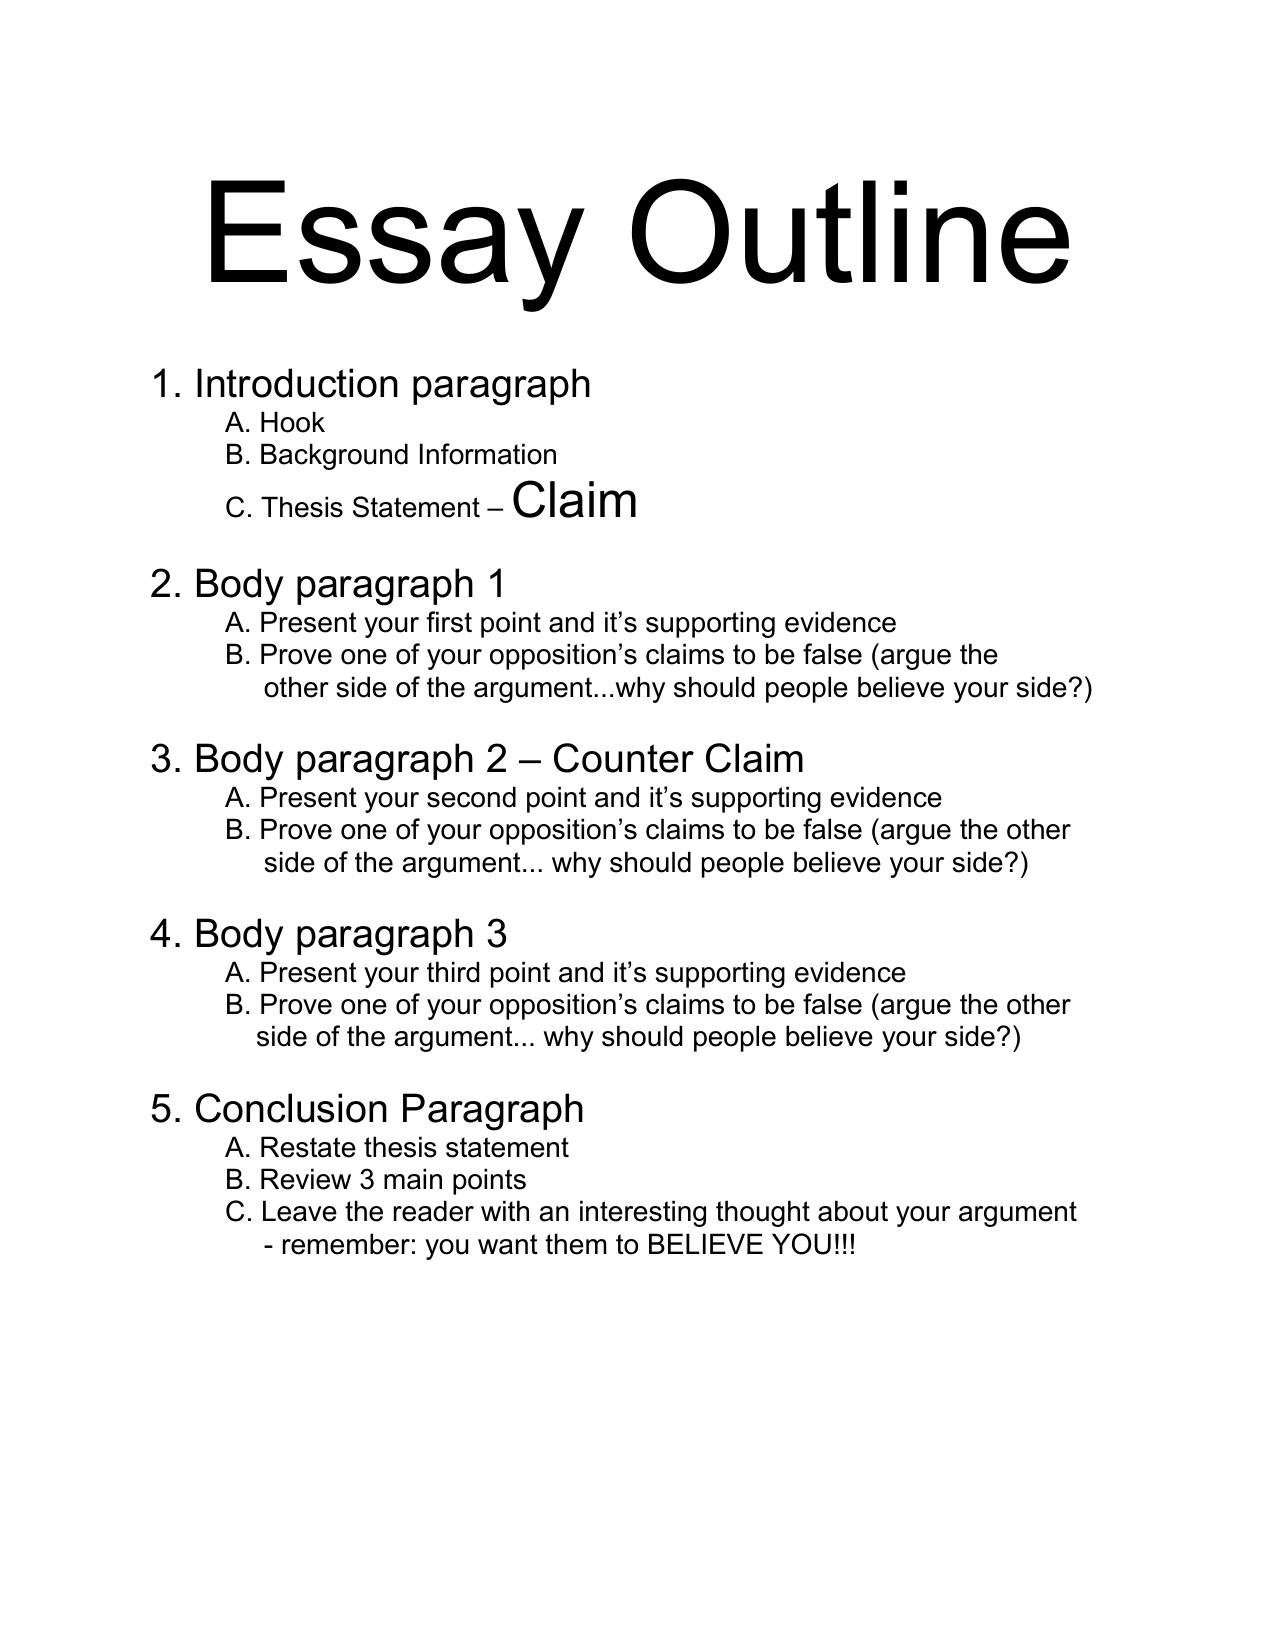 Conclusion for outsourcing essay